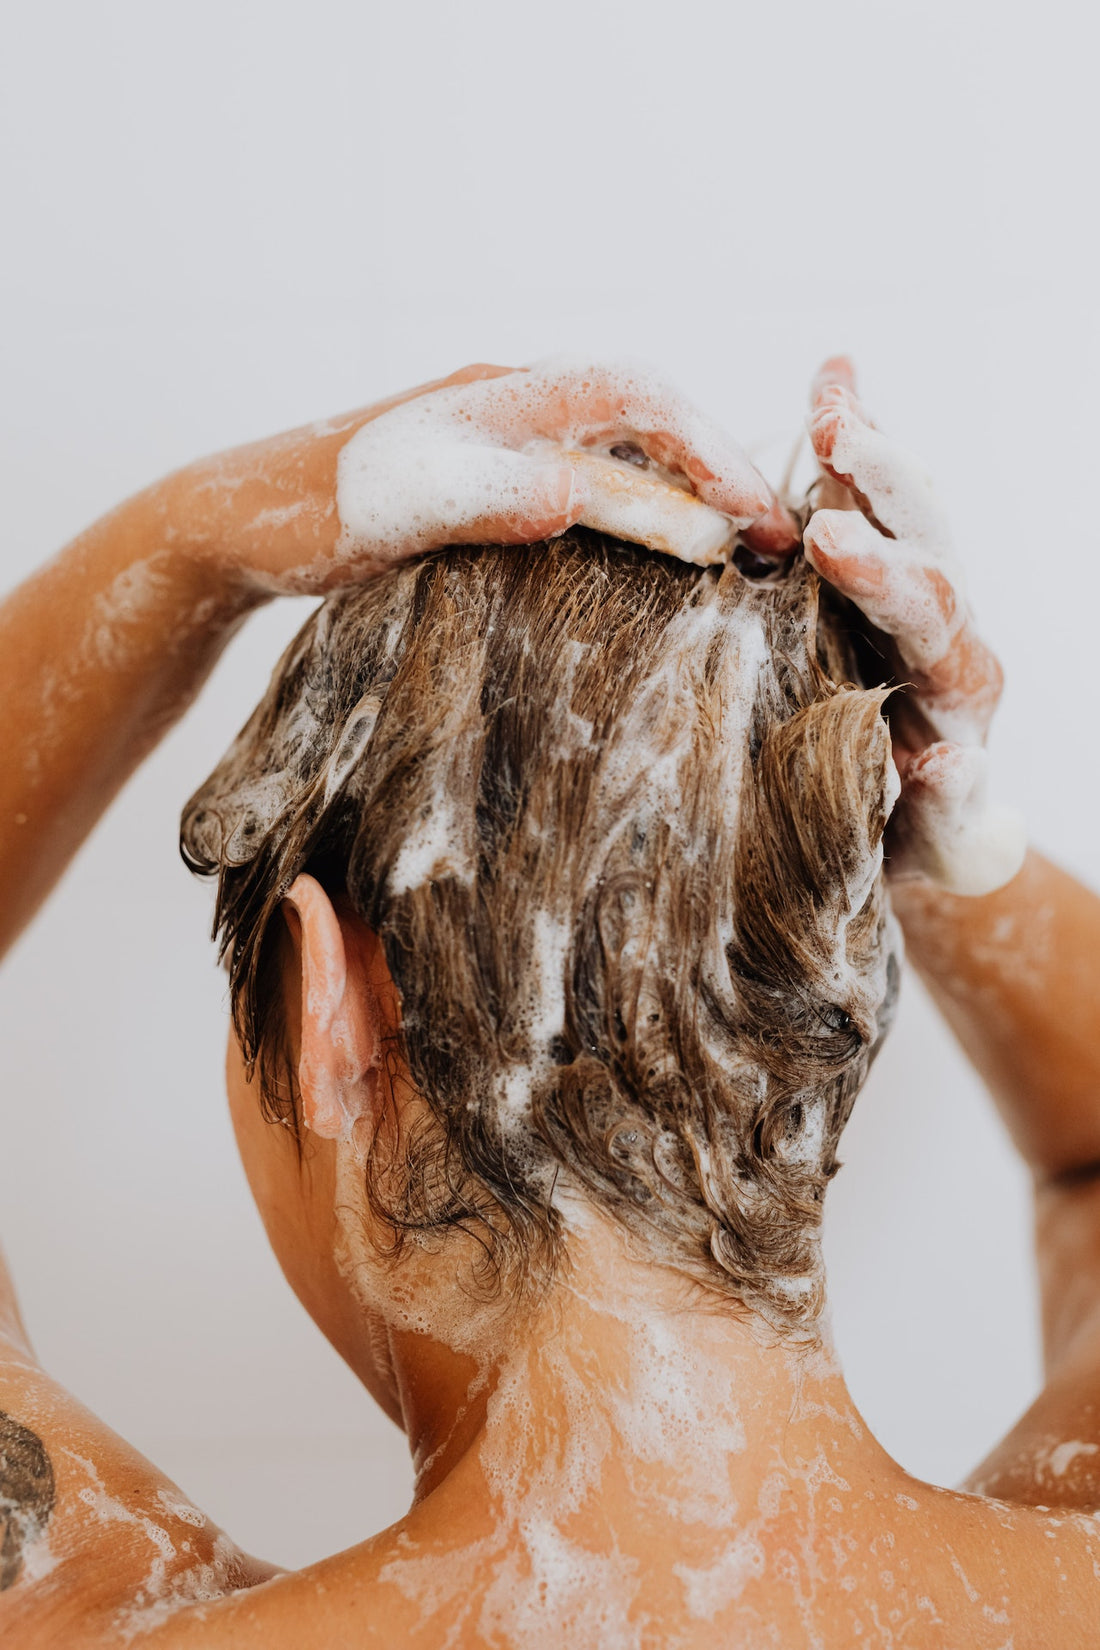 PCOS friendly Shampoos? Do's and Don'ts